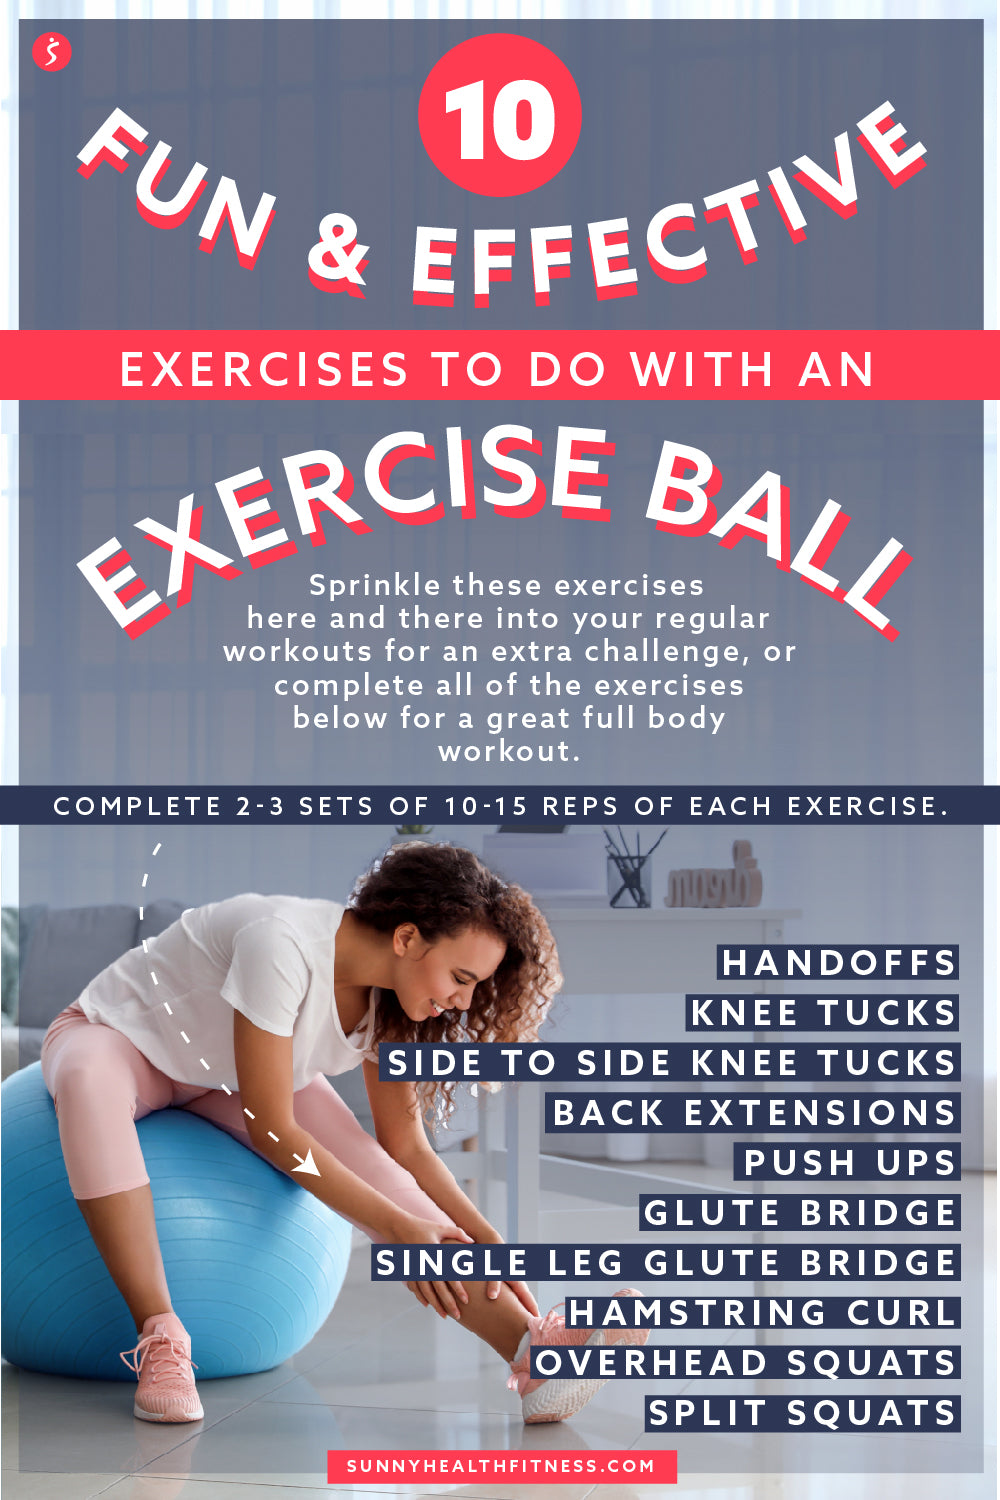 STABILITY BALL EXERCISES [Swiss Ball Beginner Stretches] 15 Min